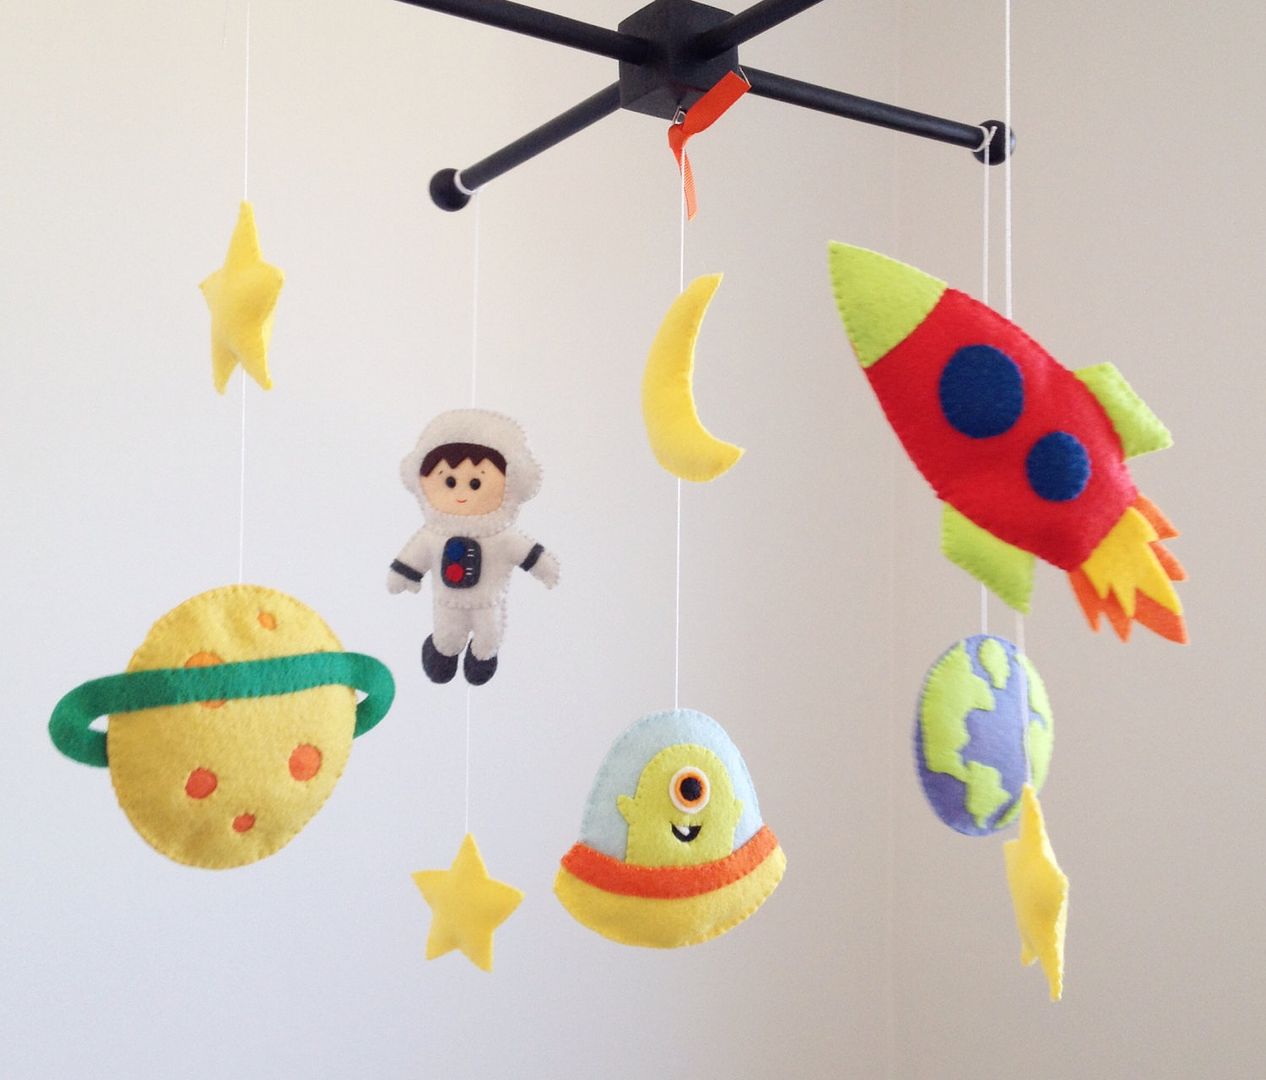 Outerspace handmade felt baby mobile by Wonderfeltland on Etsy